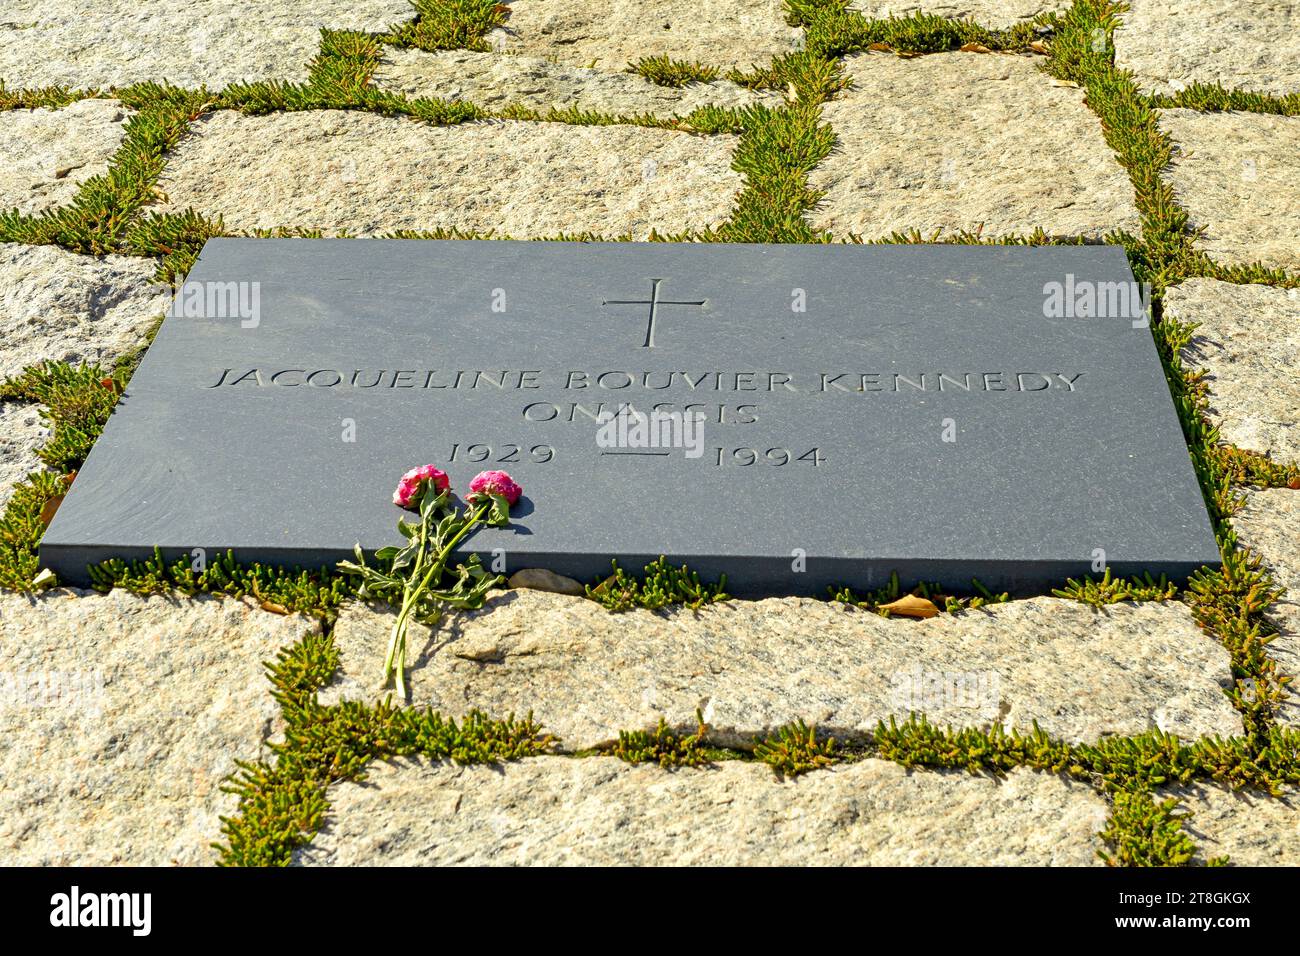 The headstone of Jacqueline Bouvier Kennedy Onassis at Arlington National Cemetery in Virginia Stock Photo